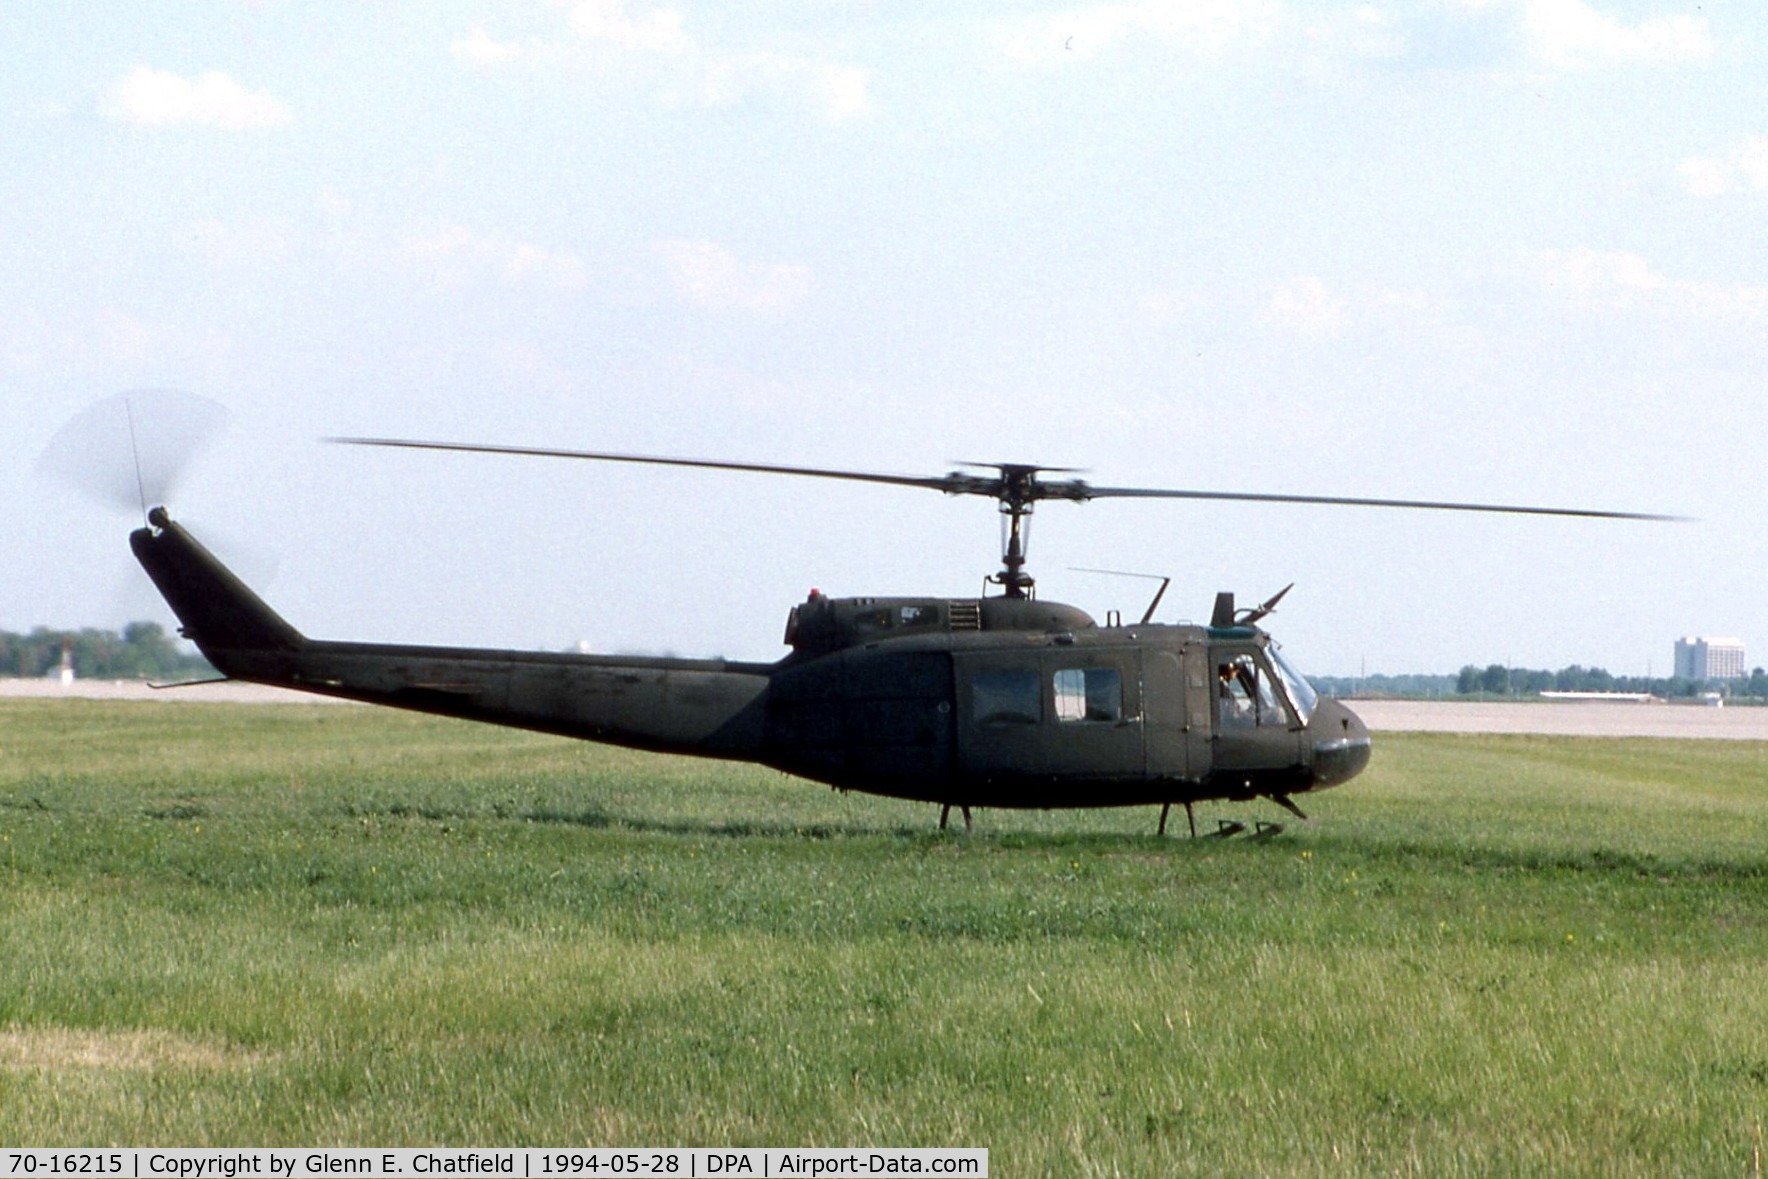 70-16215, 1970 Bell UH-1H Iroquois C/N 12520, UH-1H  for a stop-over